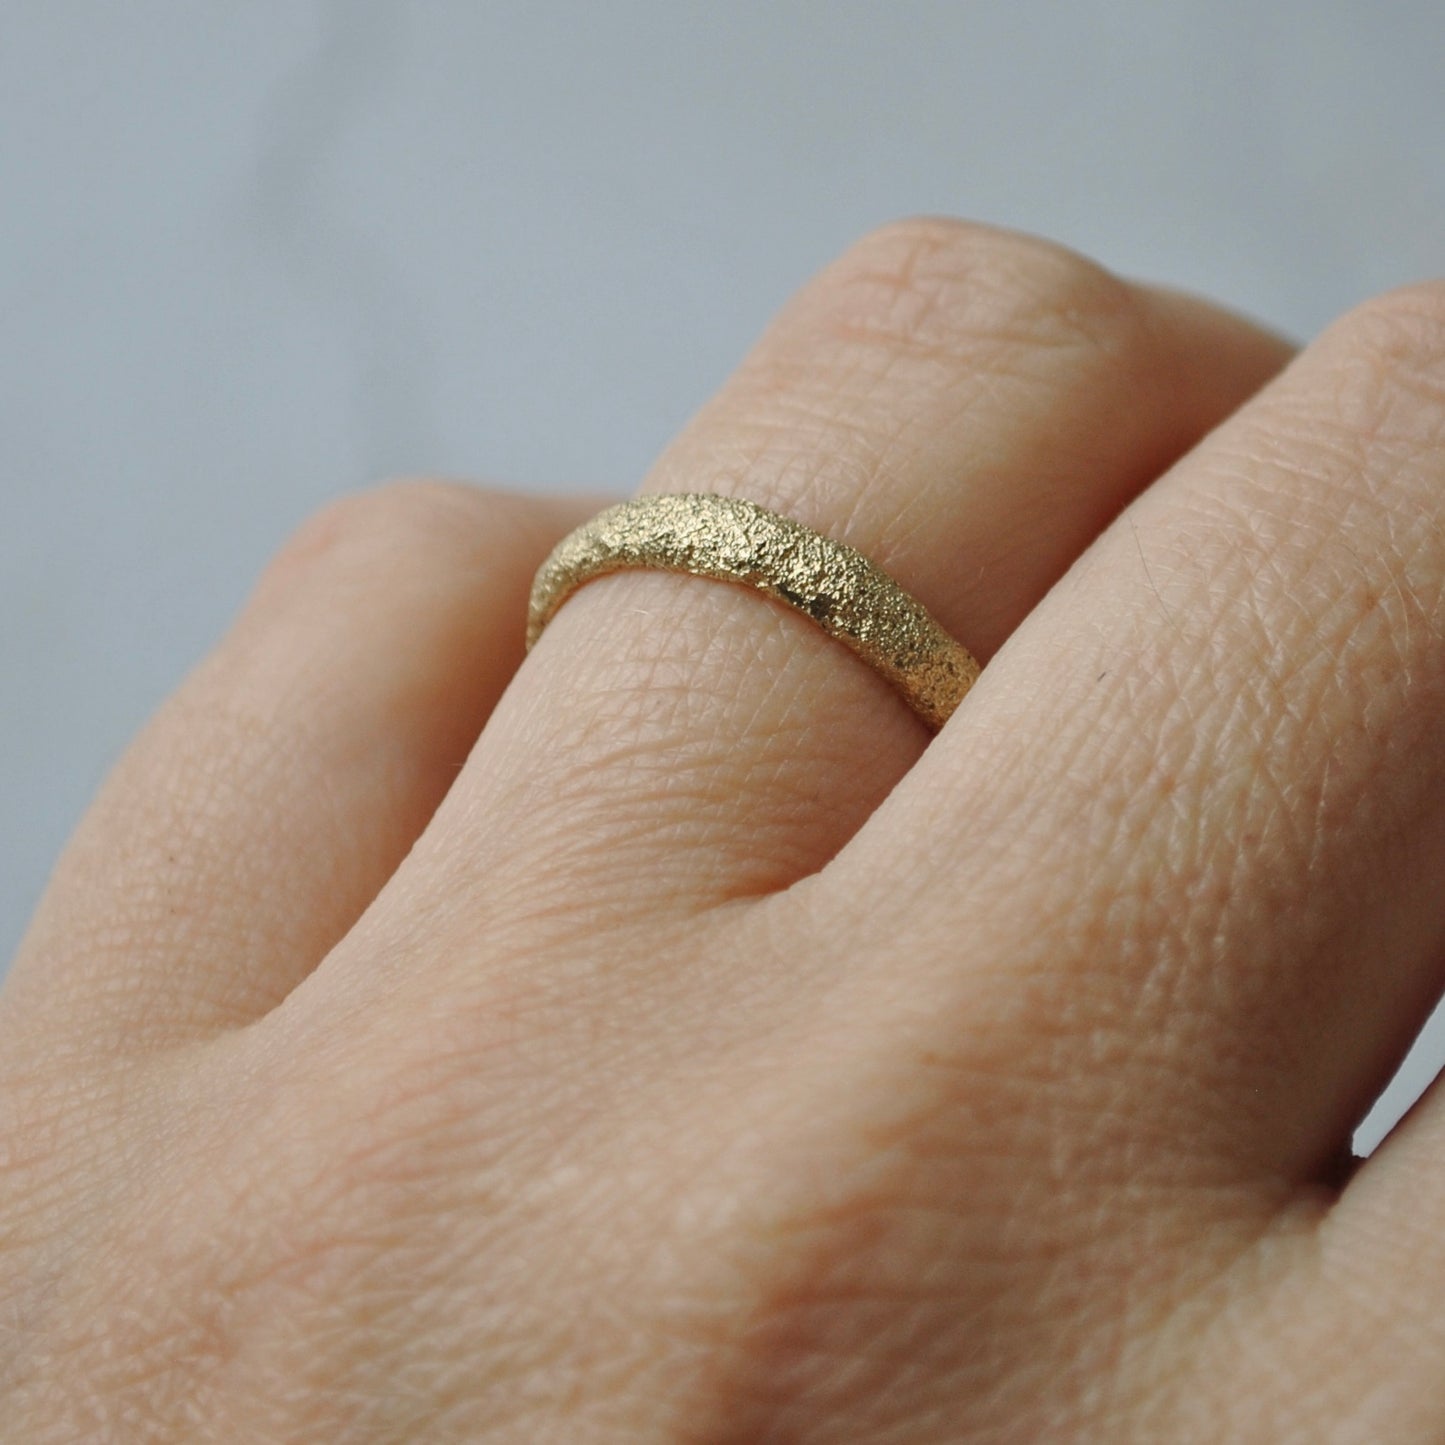 Raw textured wedding ring 3mm wide